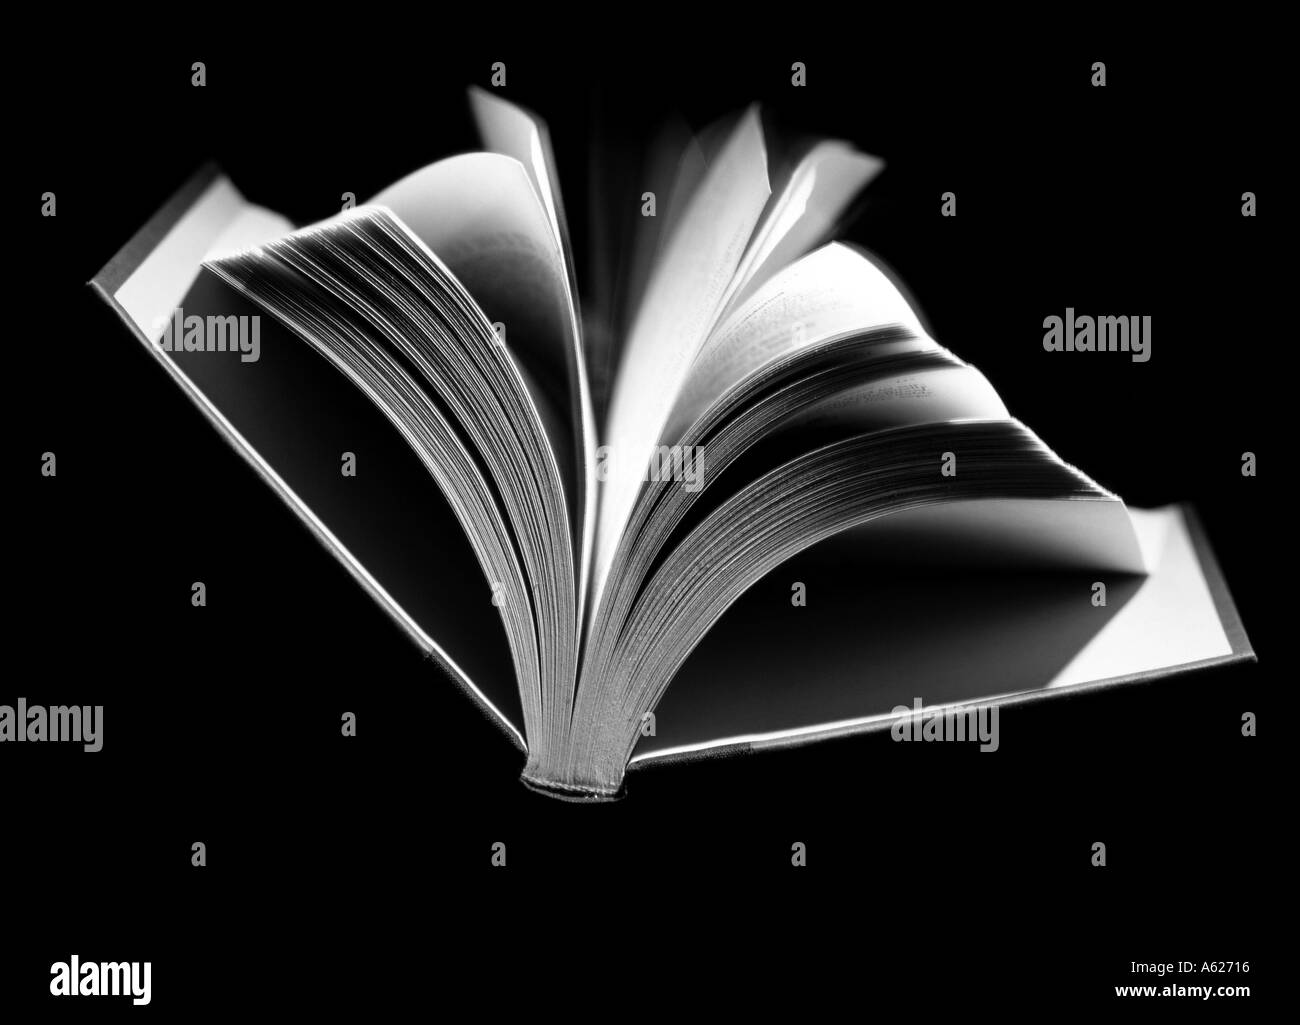 Open book with pages blurred in motion Stock Photo